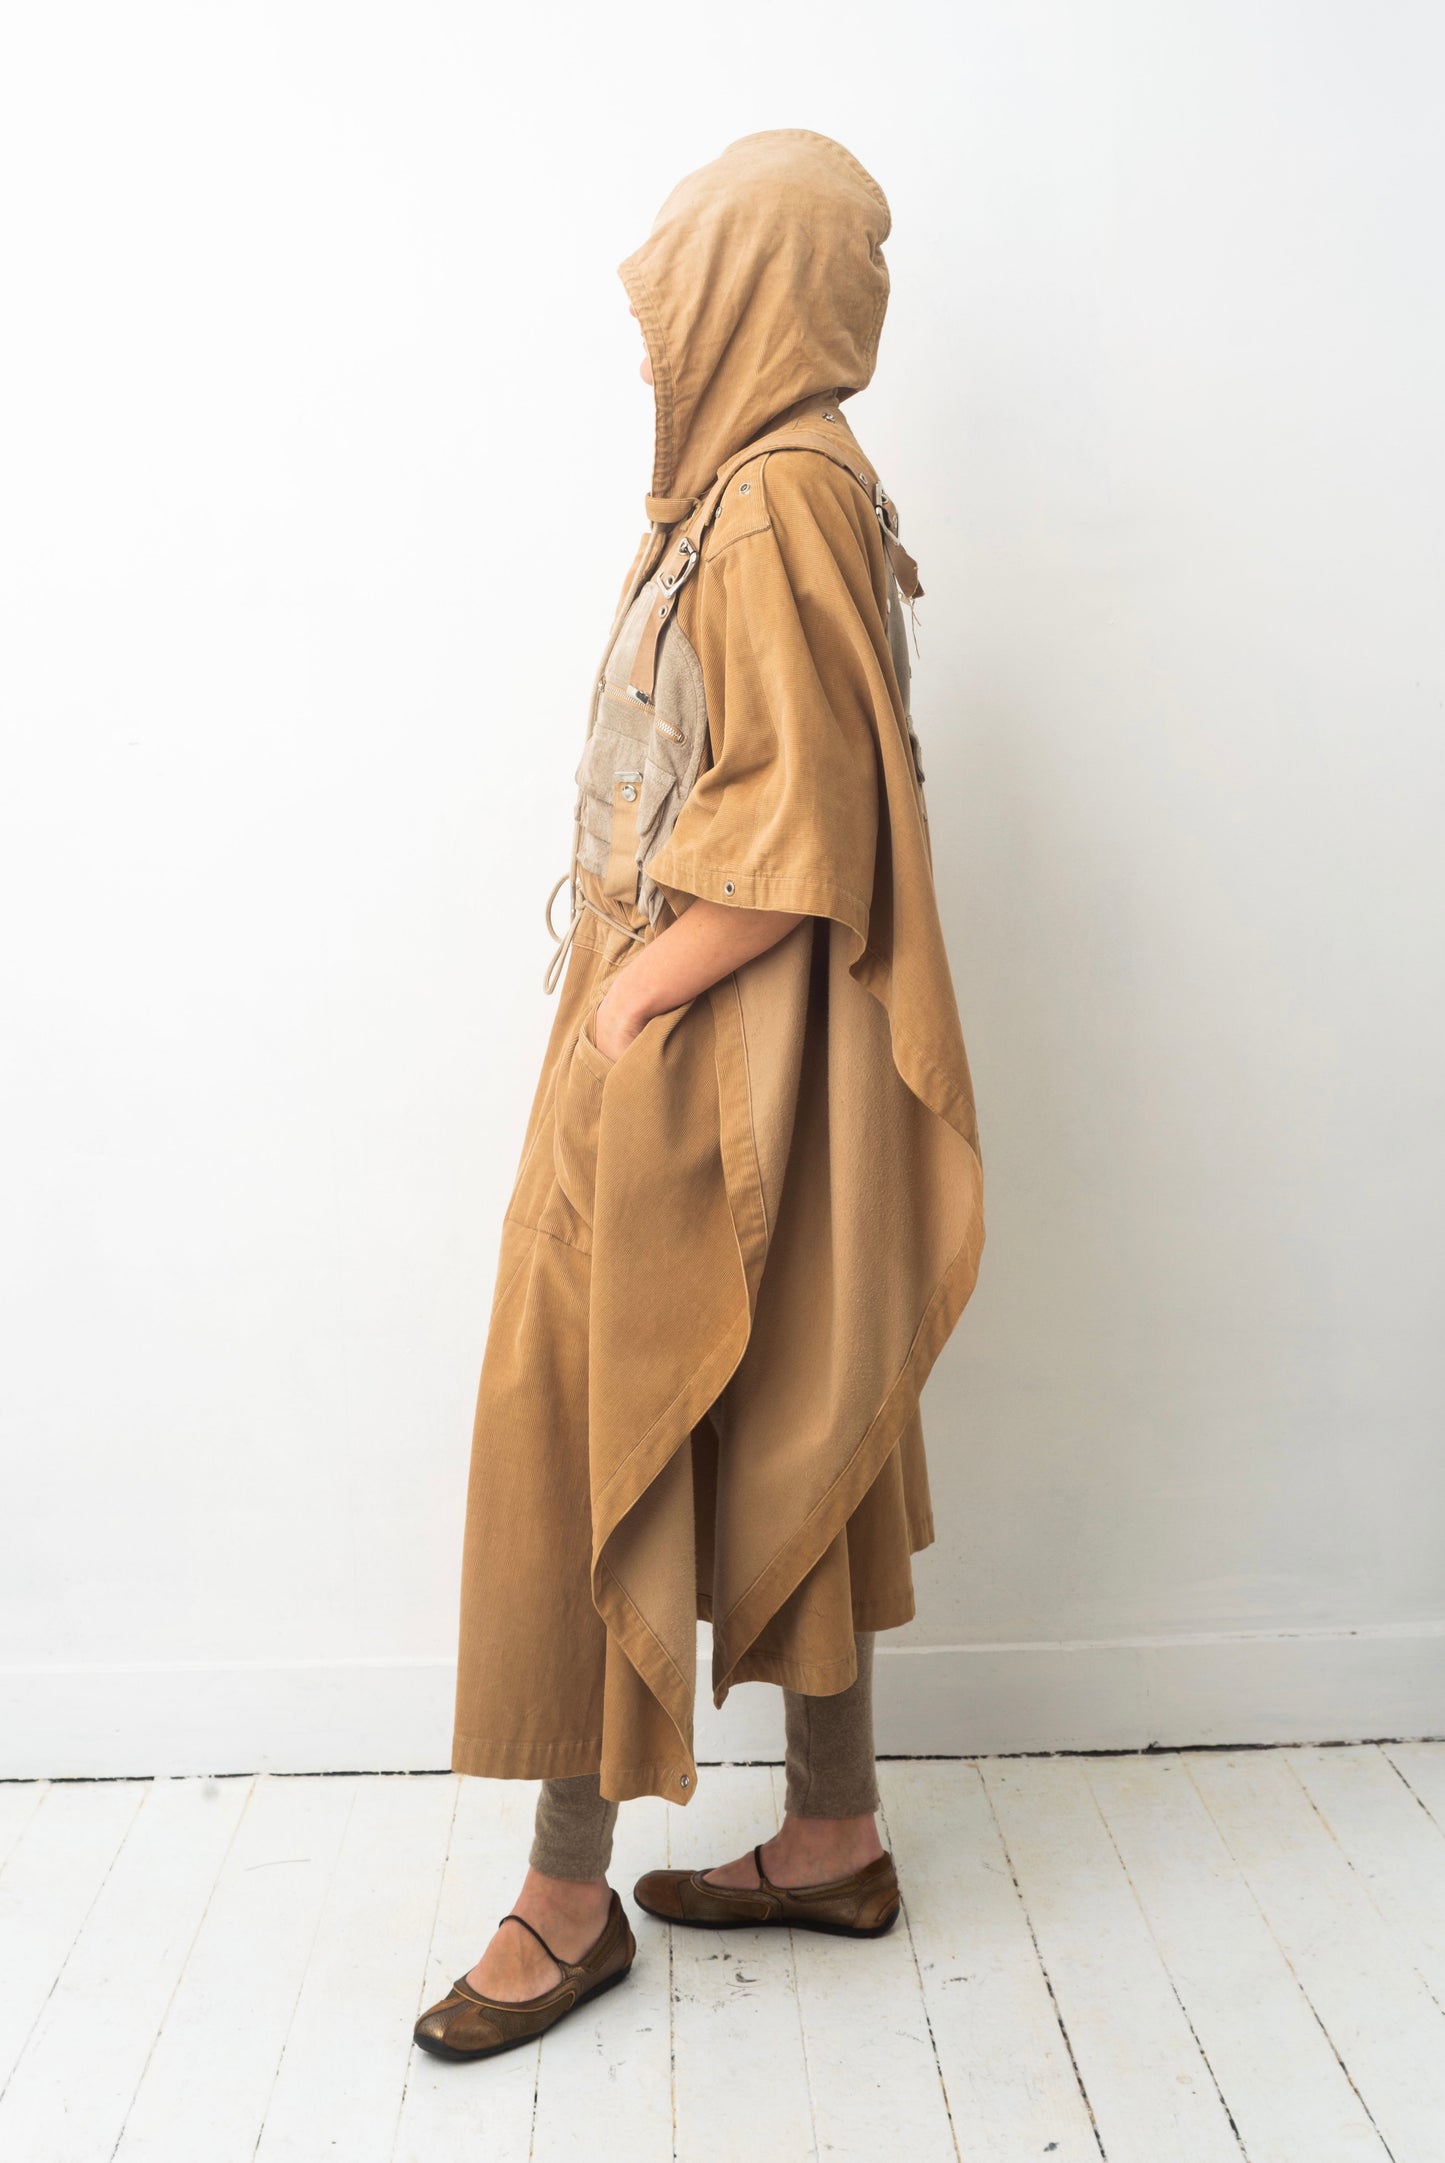 Kansaï Yamamoto 80’s dystopian cape with integrated backpack